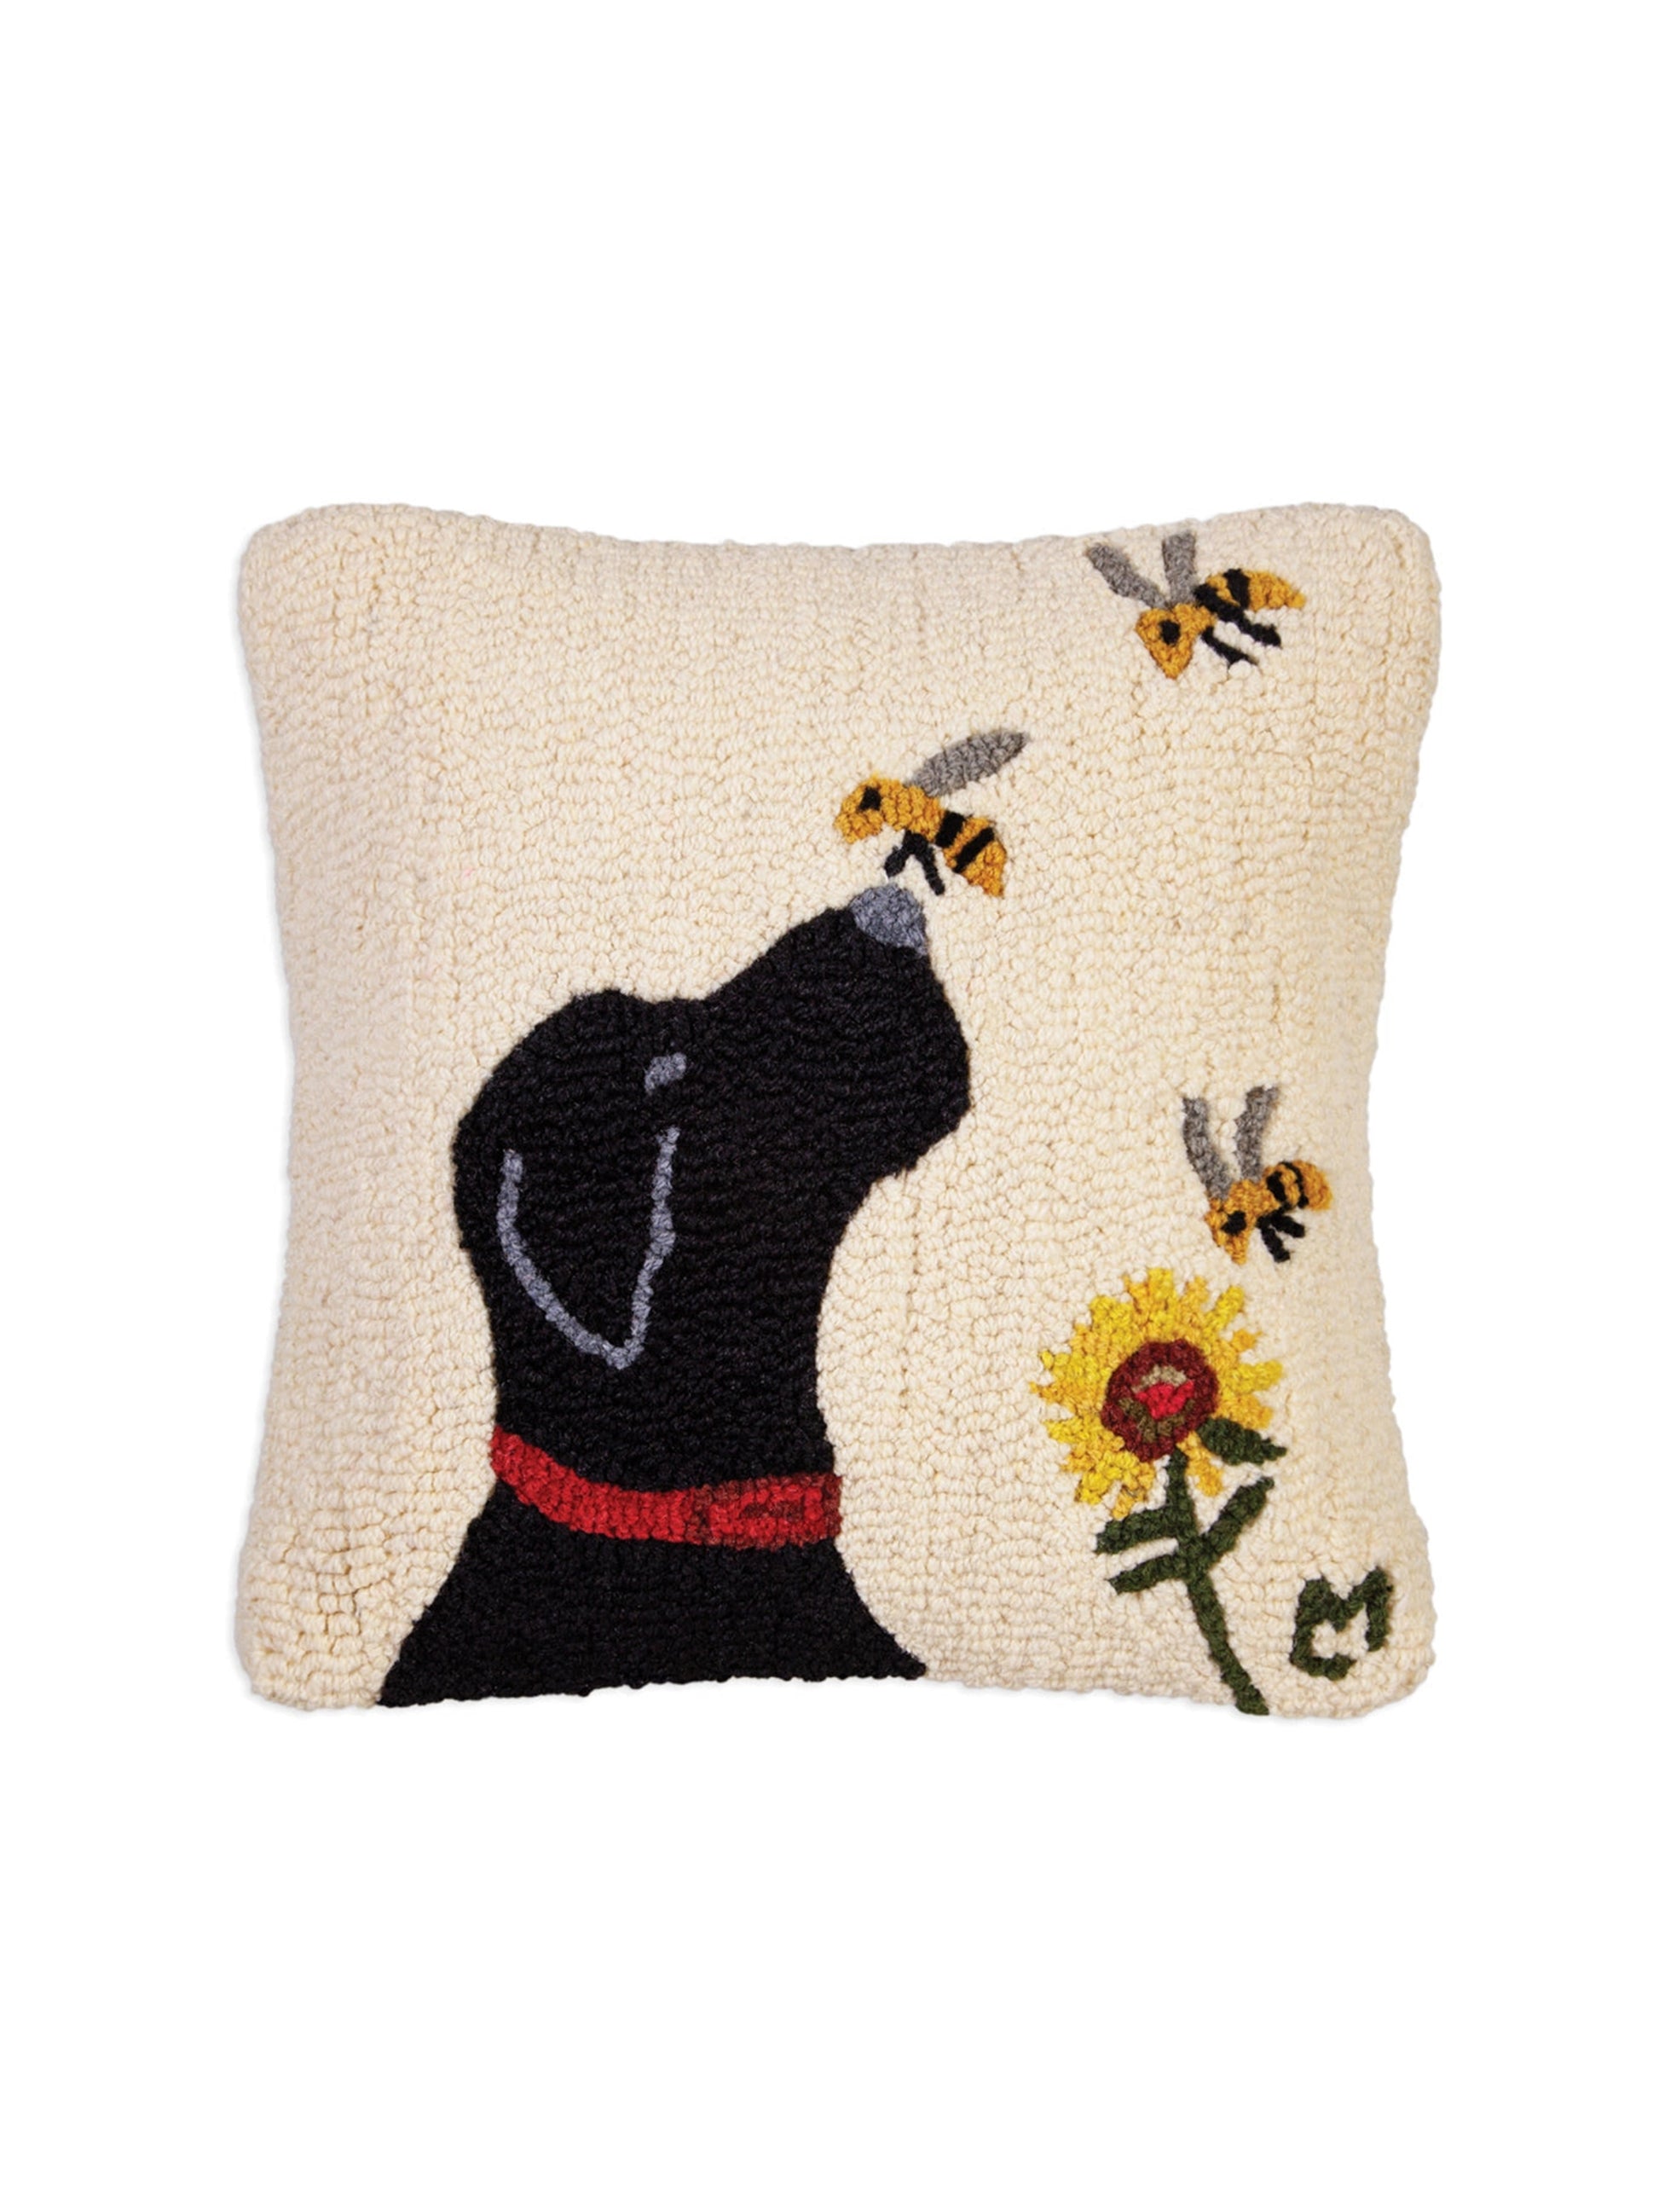 Black Lab with Bee and Flower Hooked Wool Pillow Weston Table